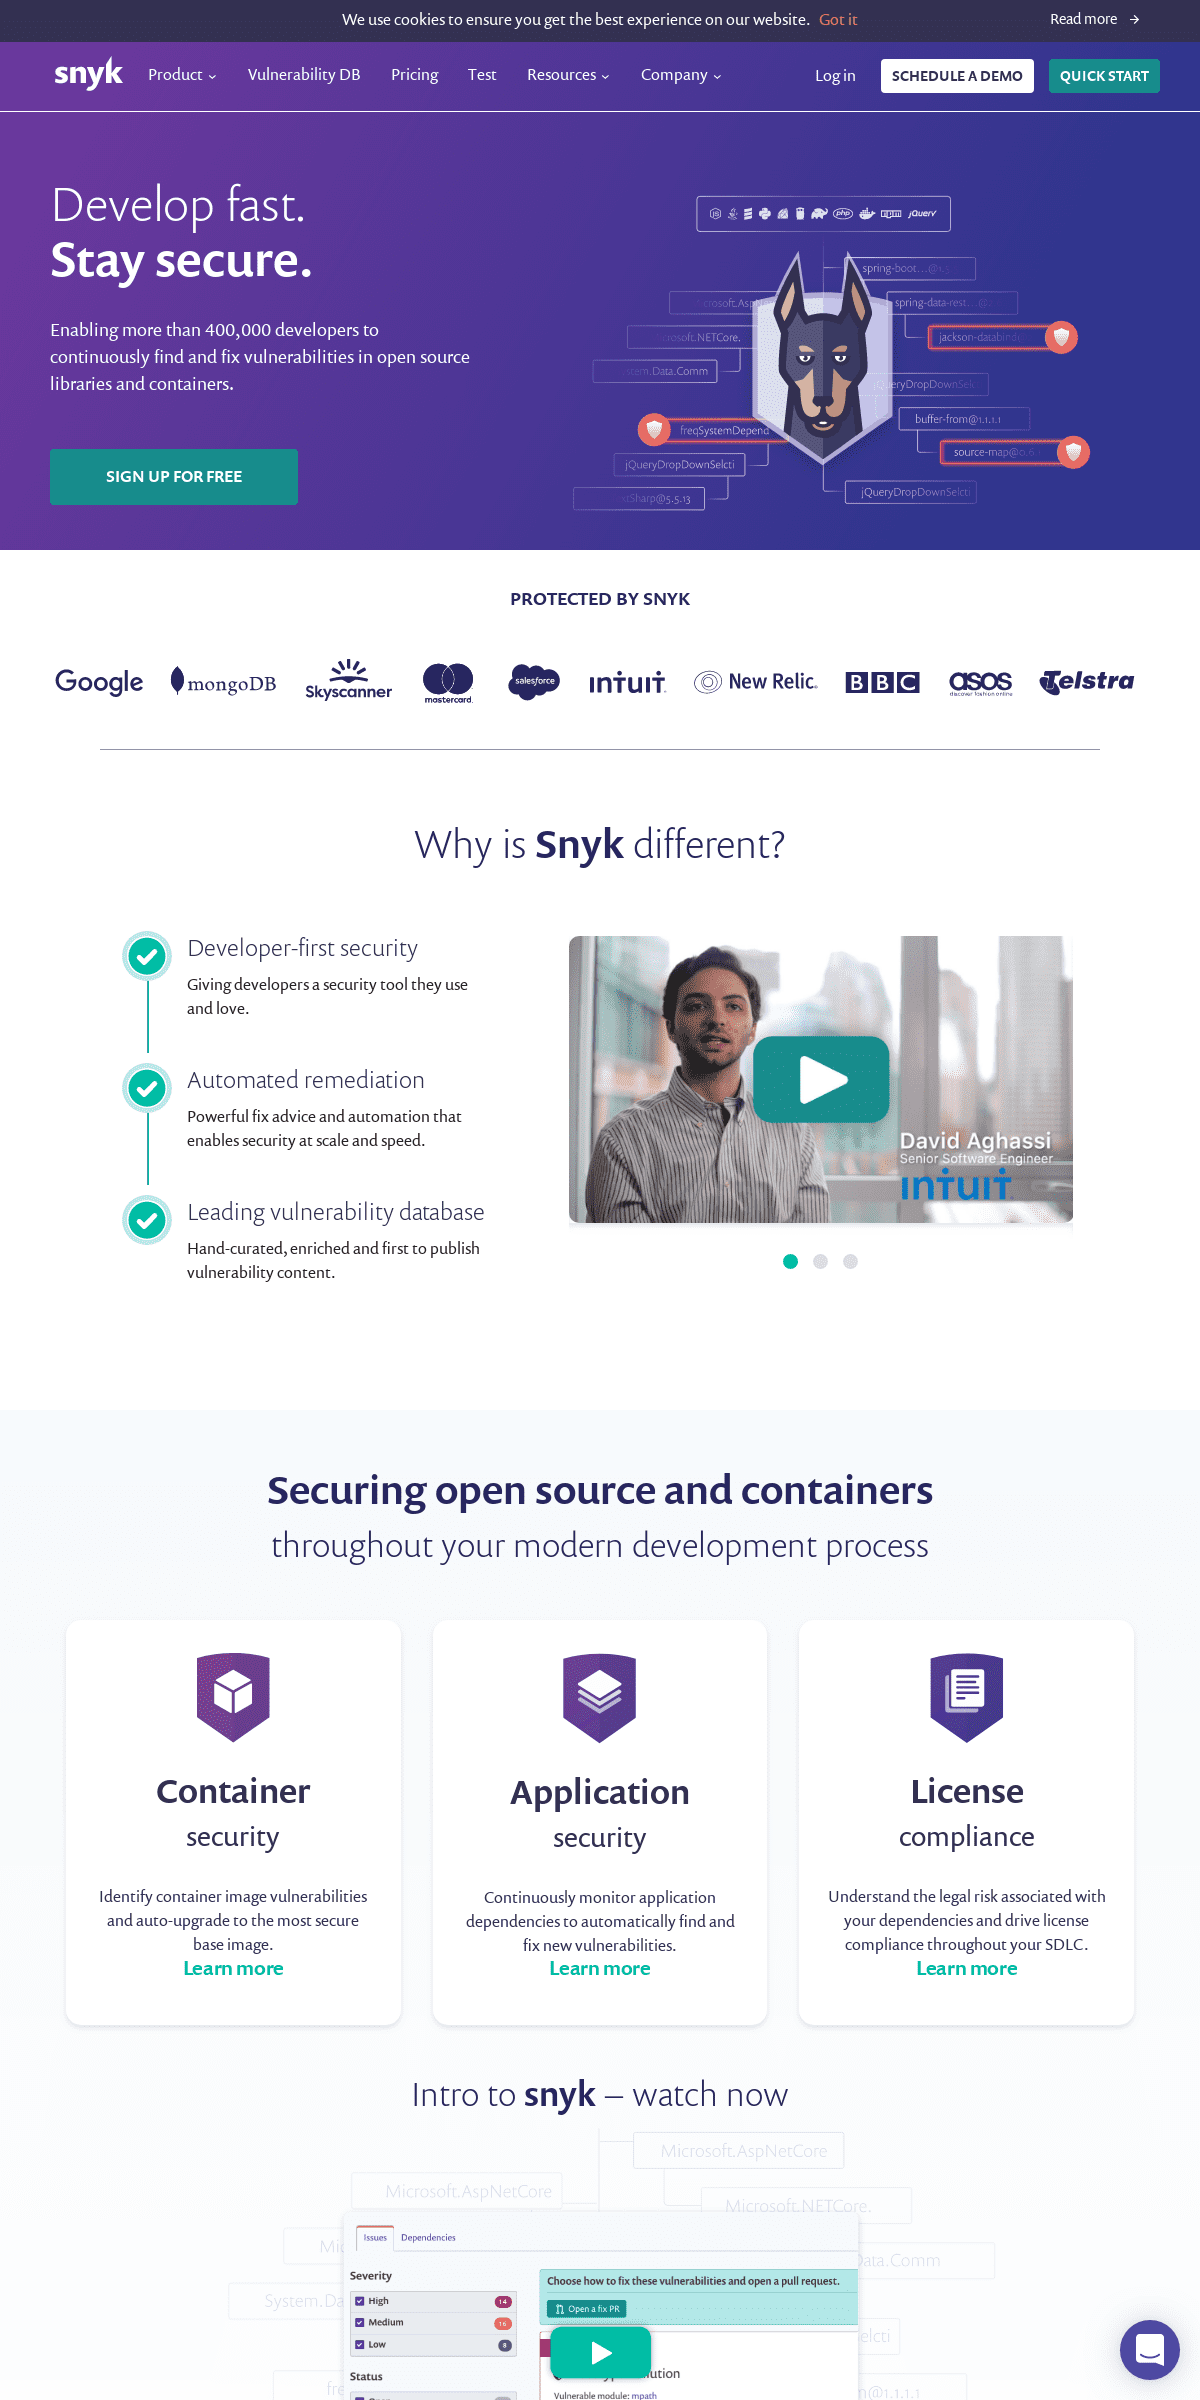 A complete backup of snyk.io